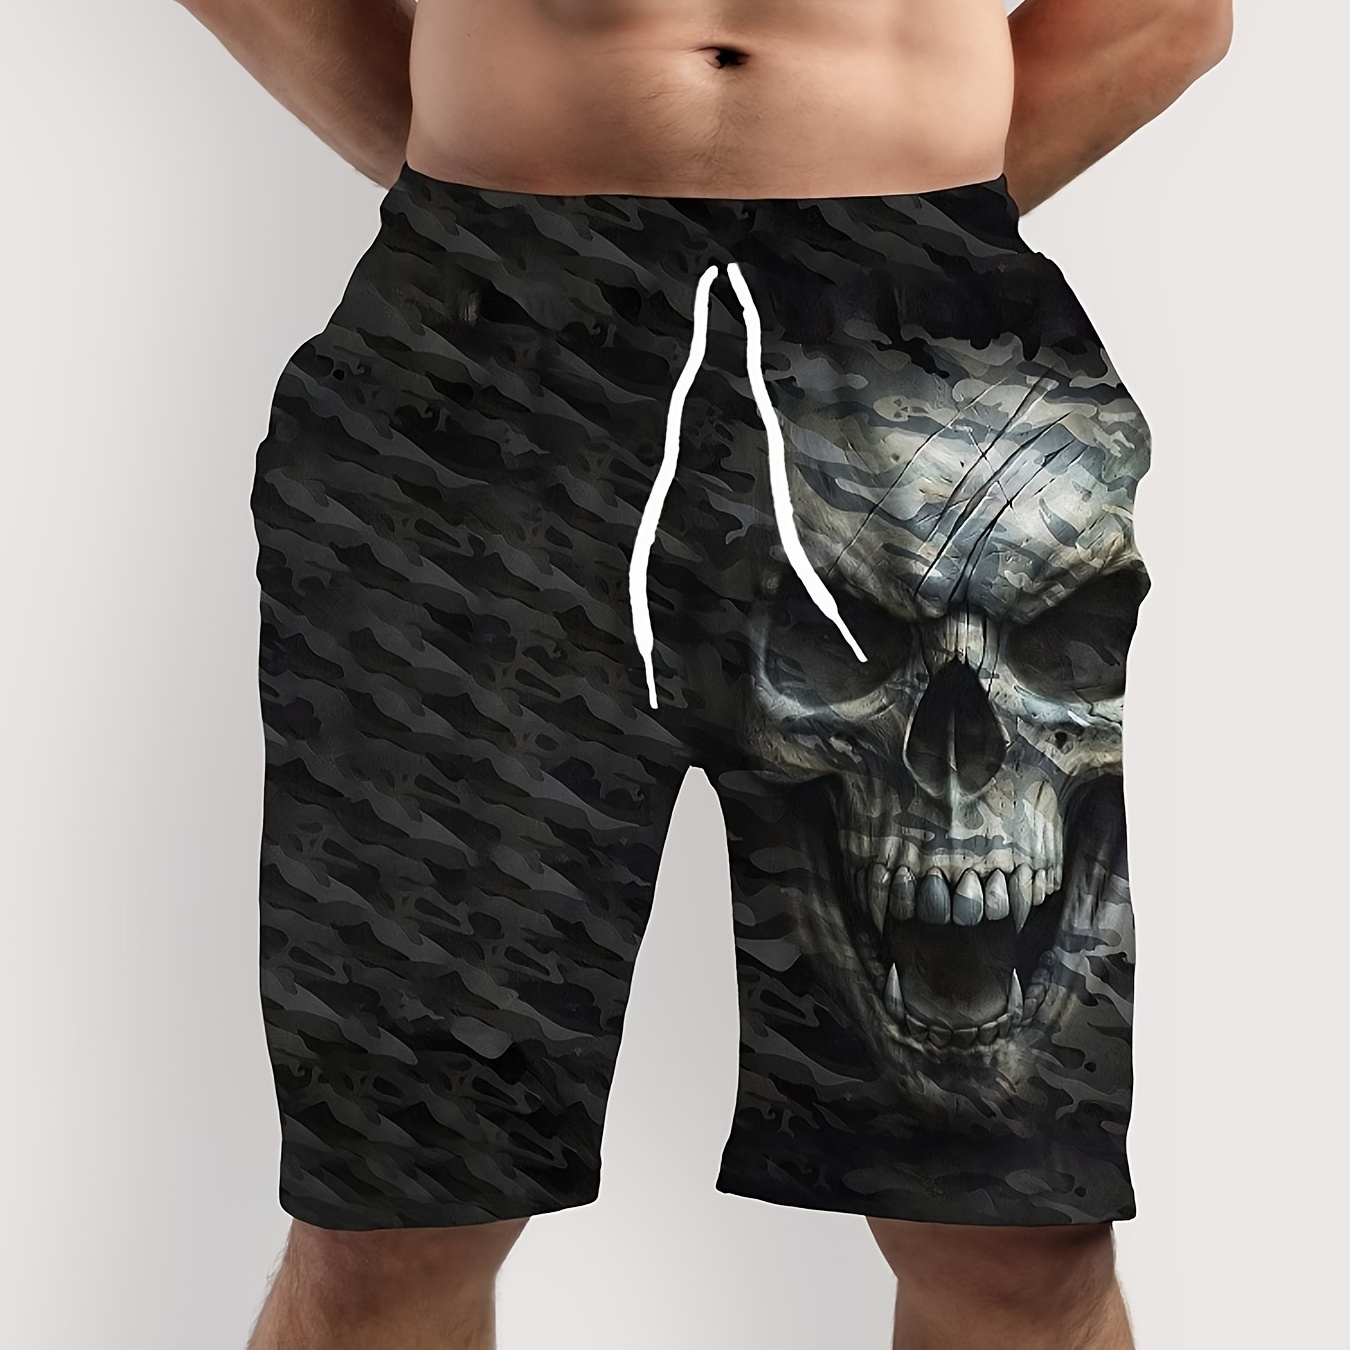 

Men's 3d Digital Skull And Stripe Pattern Casual Shorts With Drawstring And Pockets, Novel And Cool Shorts Suitable For Summer Beach And Sports Wear